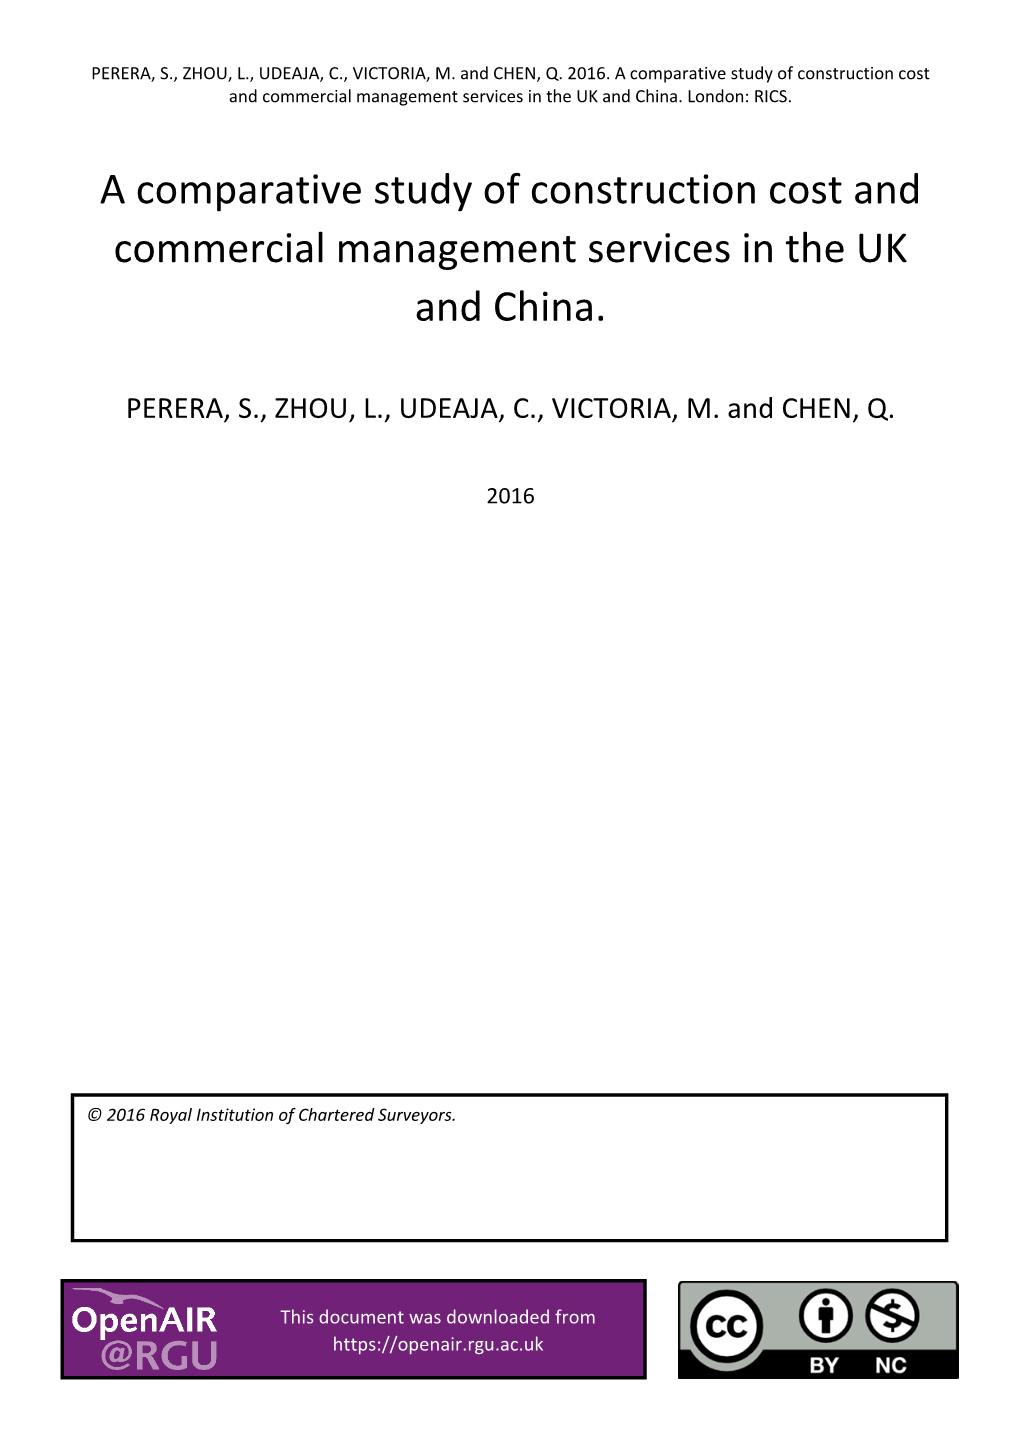 A Comparative Study of Construction Cost and Commercial Management Services in the UK and China